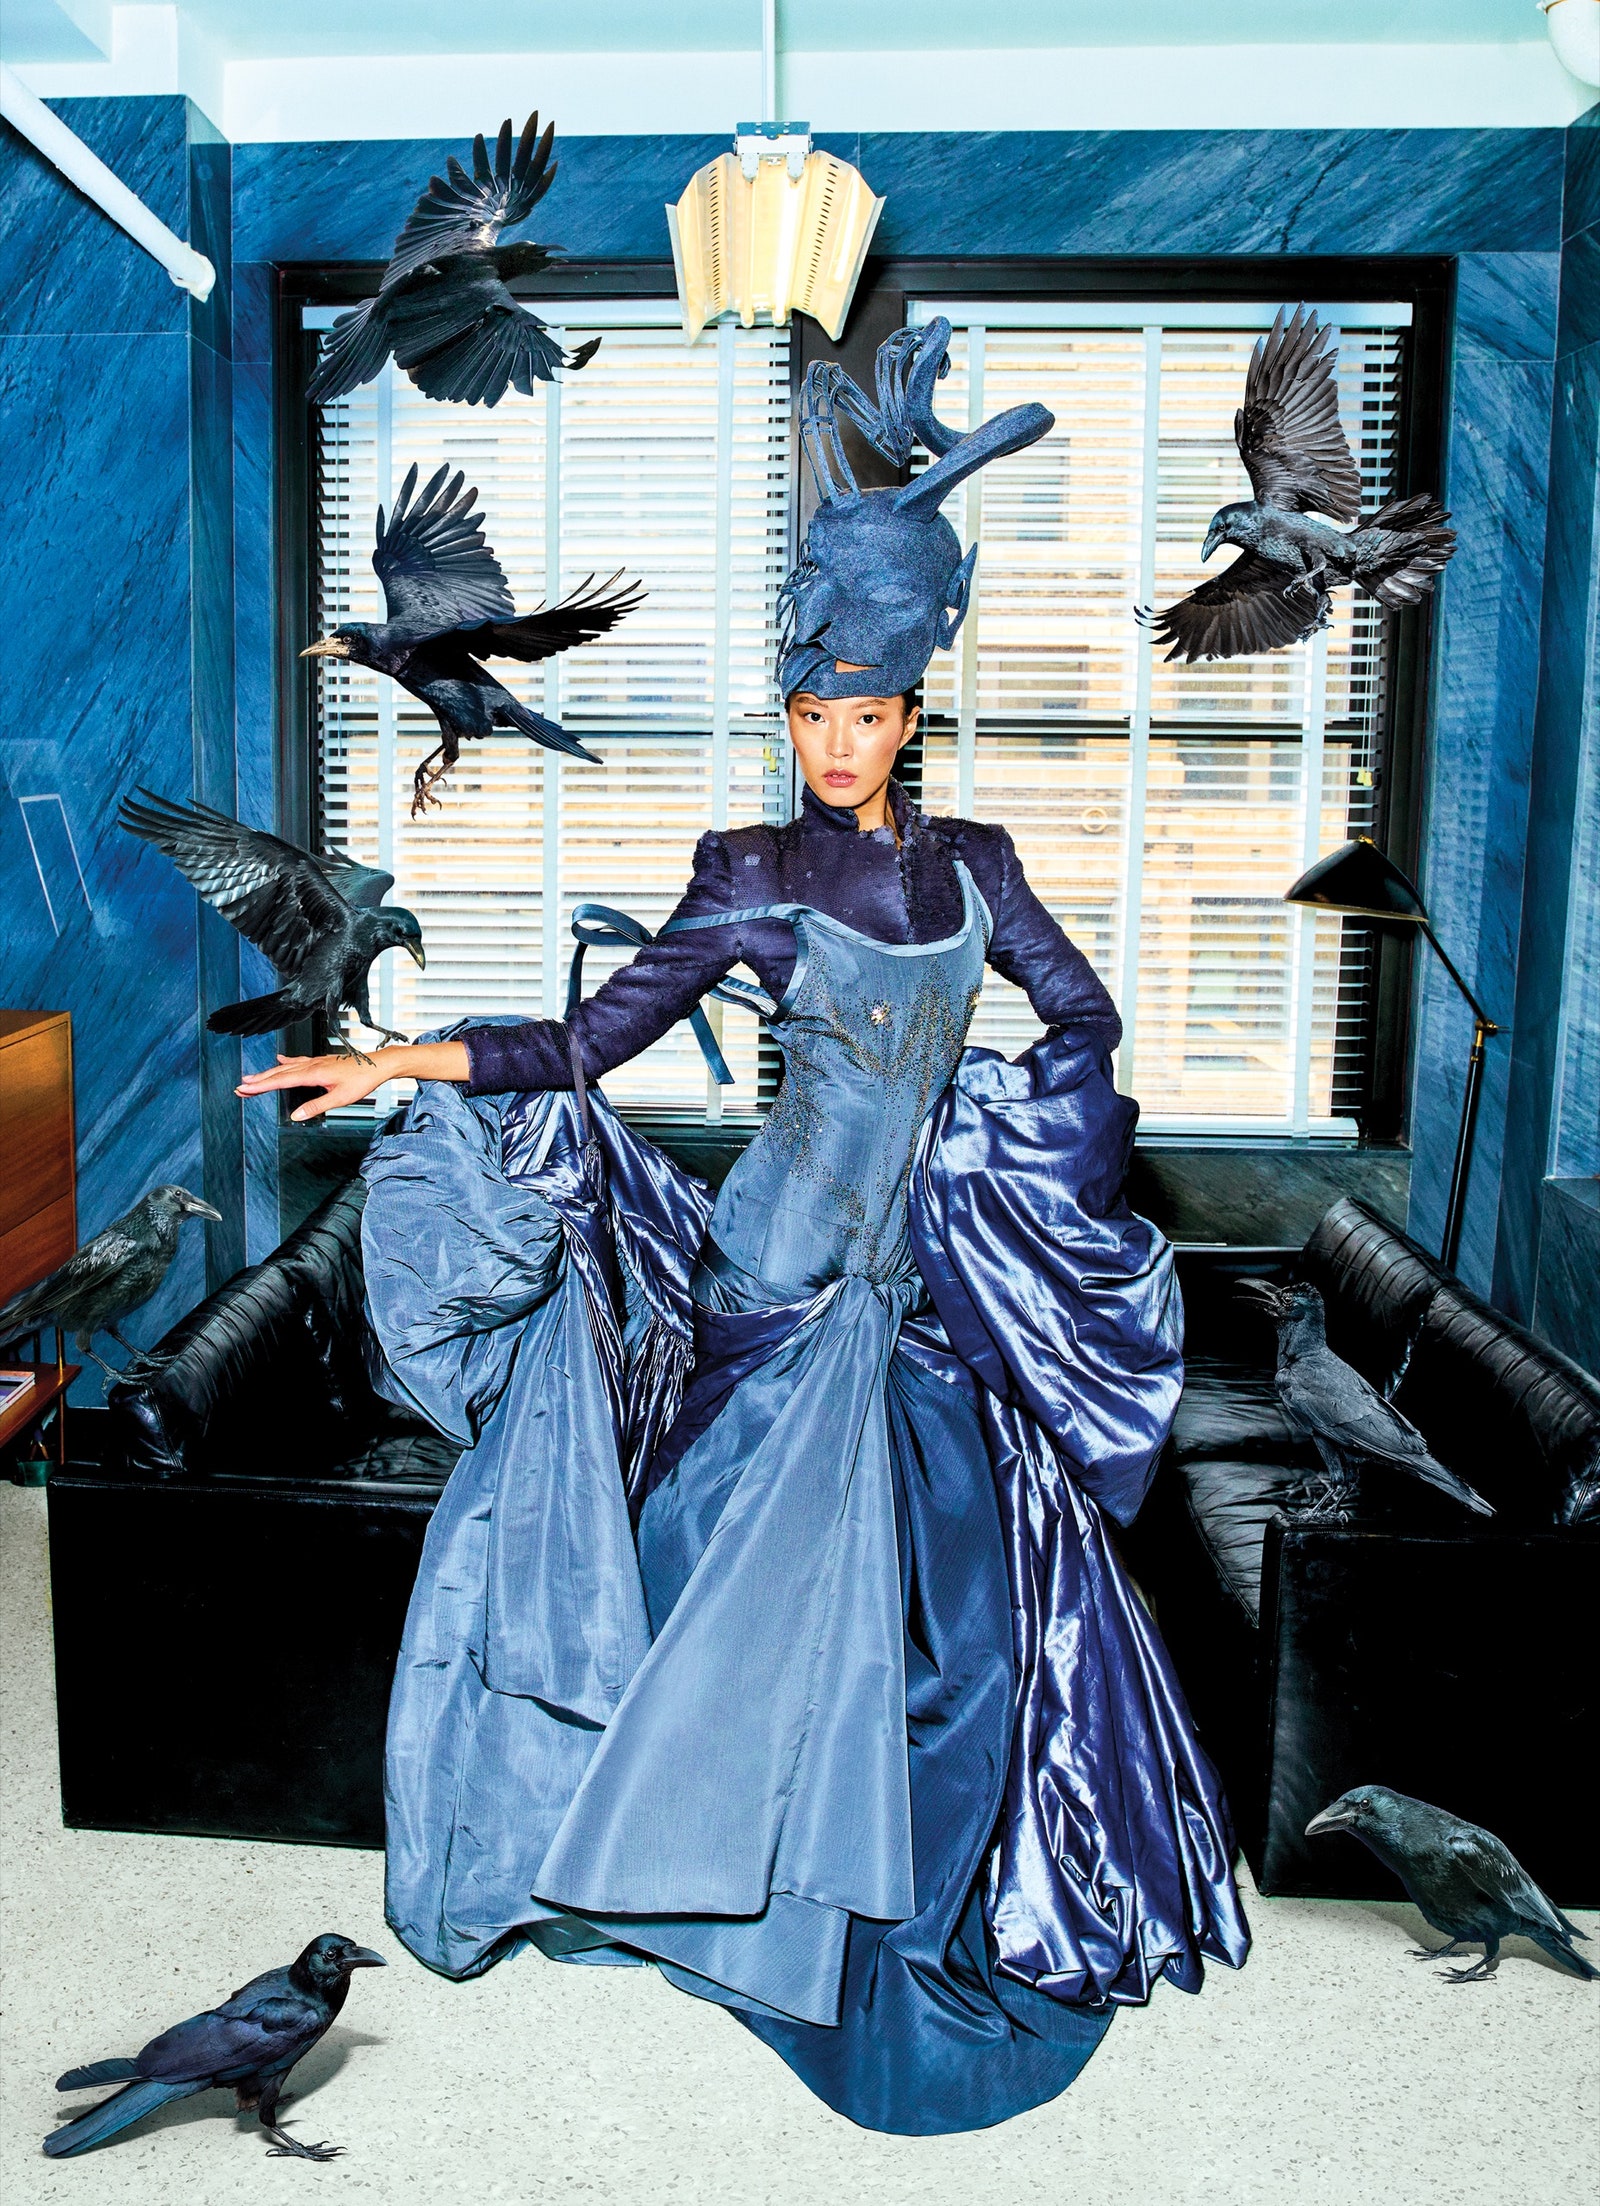 A model poses in an elaborate blue gown while birds fly and perch around her.